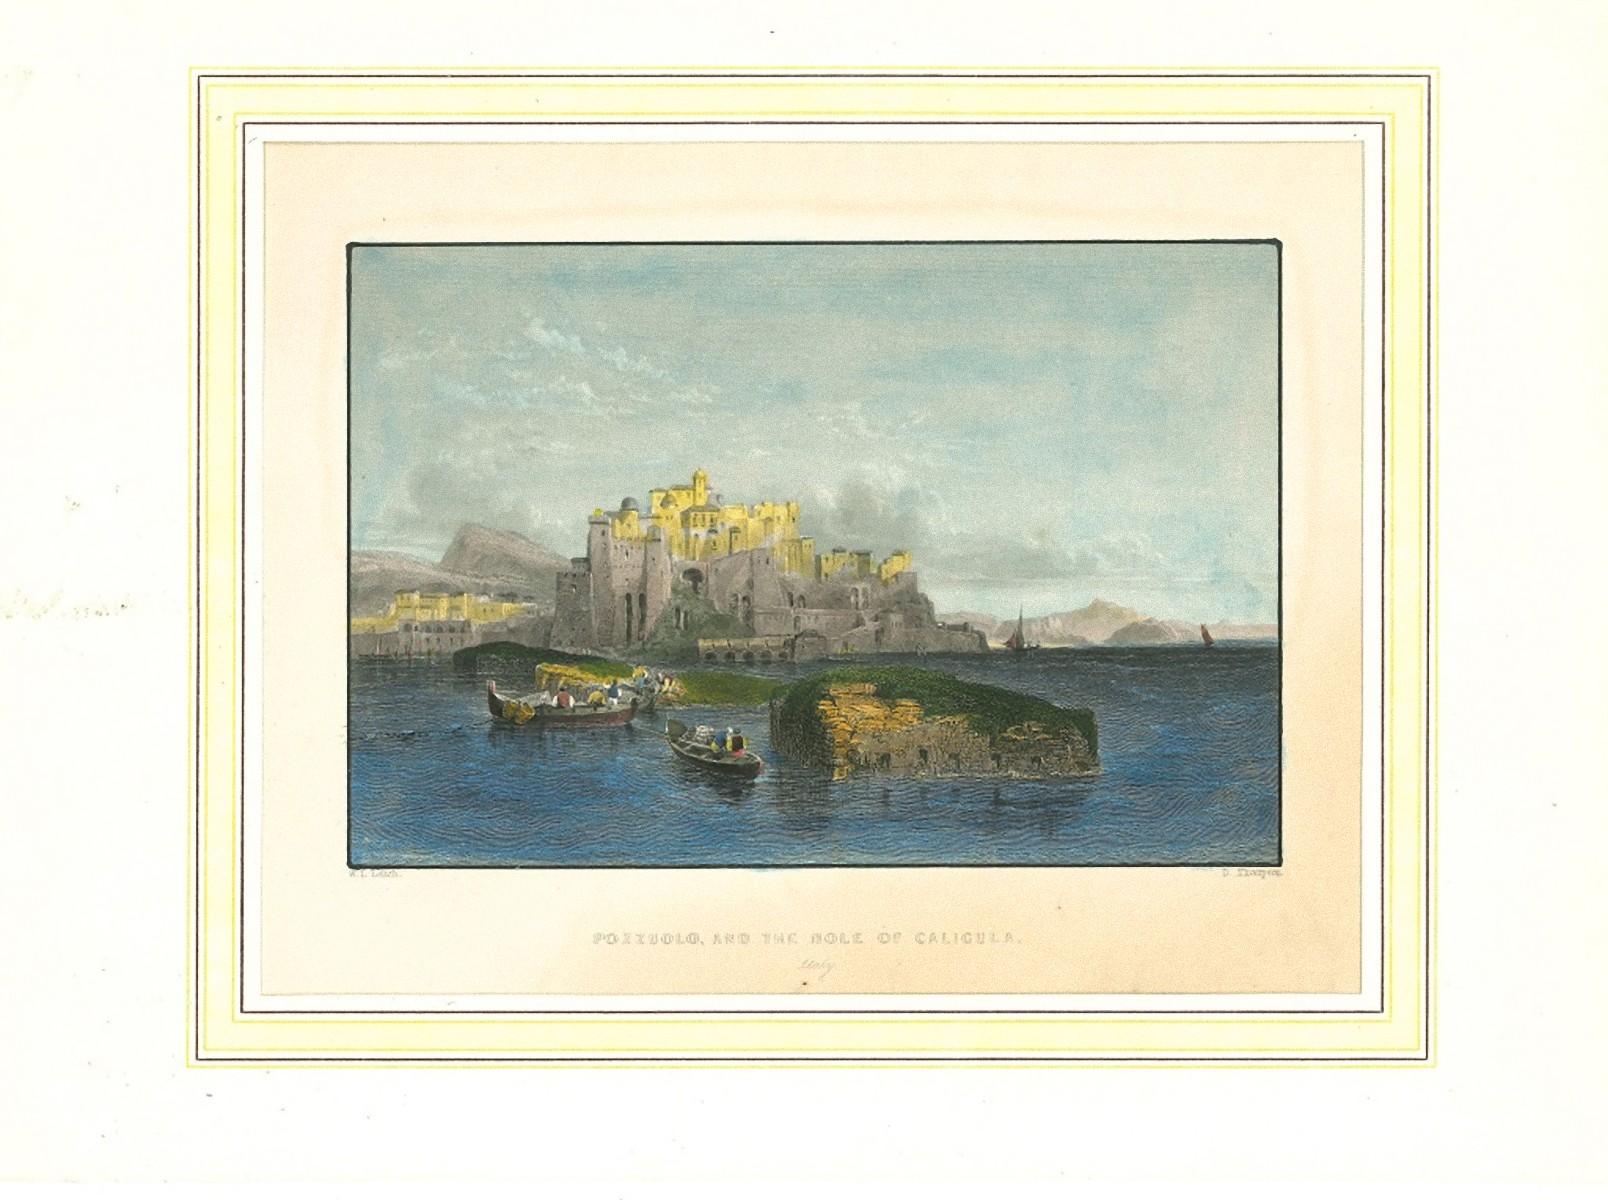 Unknown Landscape Print - Ancient View of Pozzuolo - Original Lithograph on Paper - 19th Century